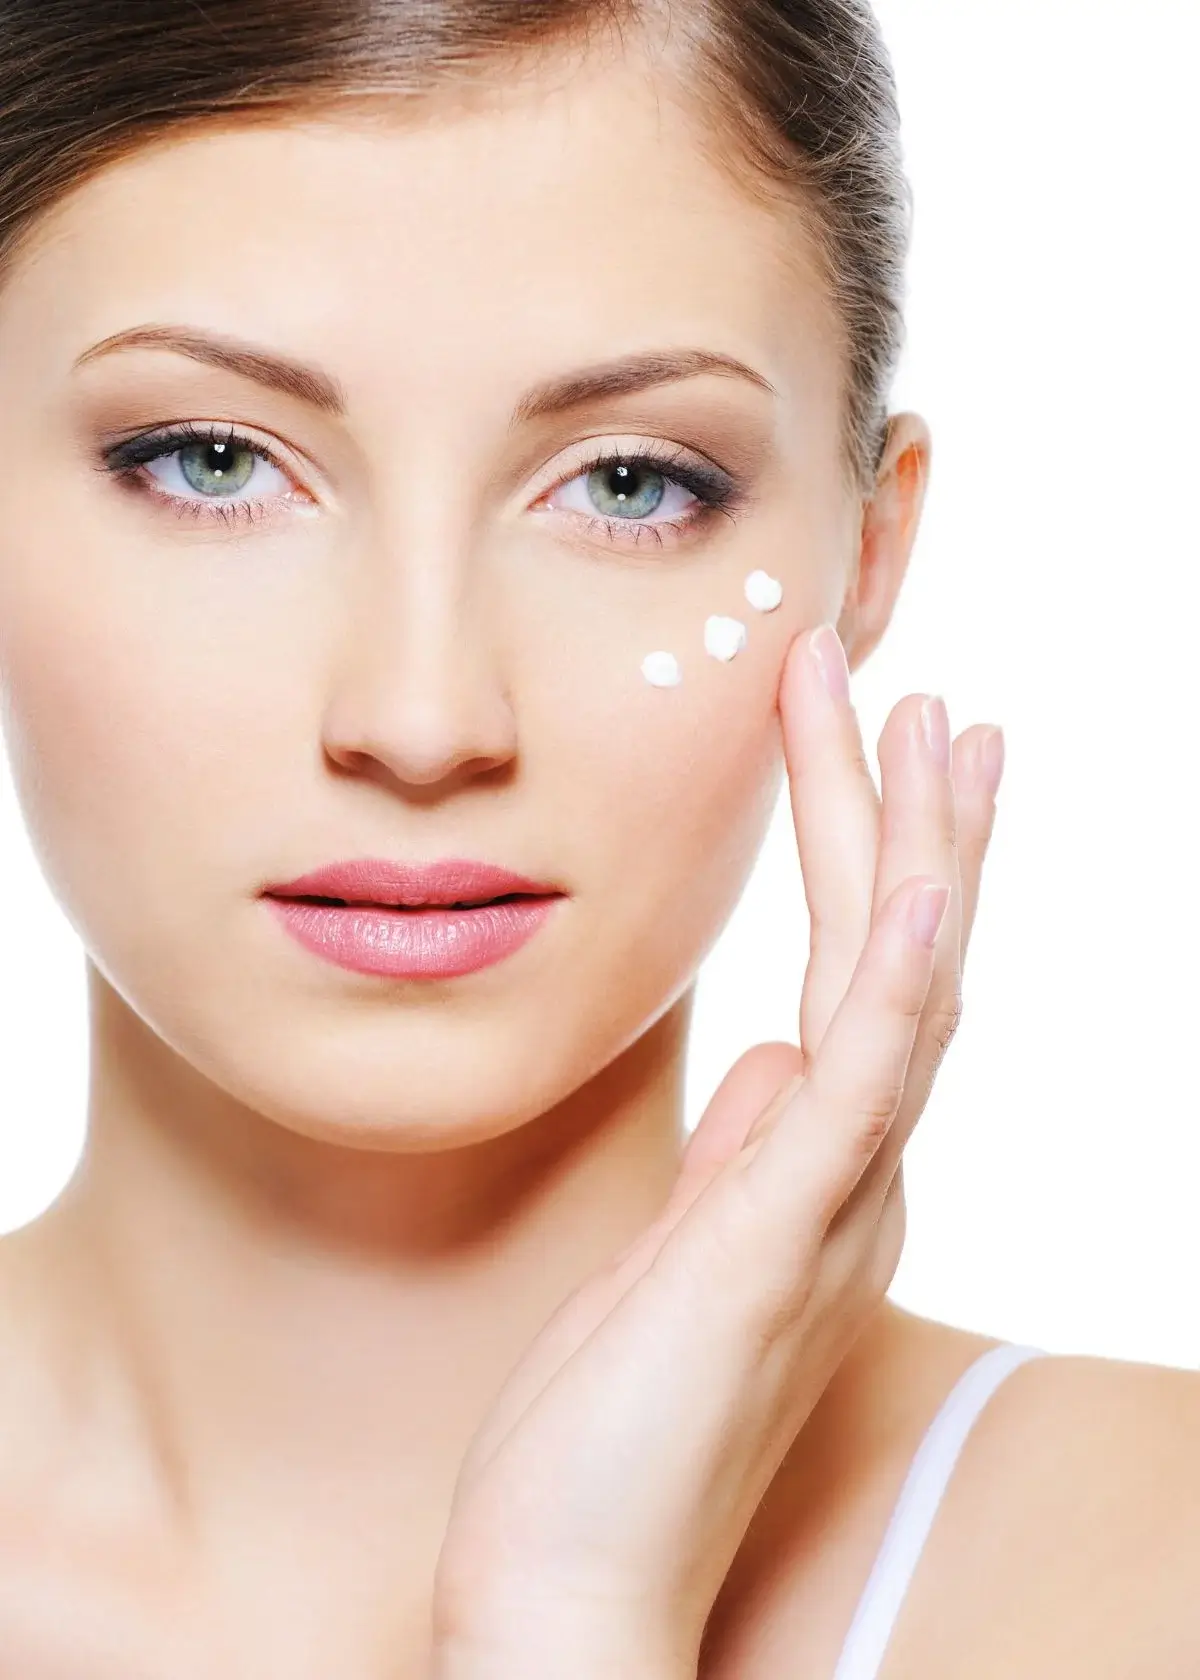 How to choose the right collagen eye cream?